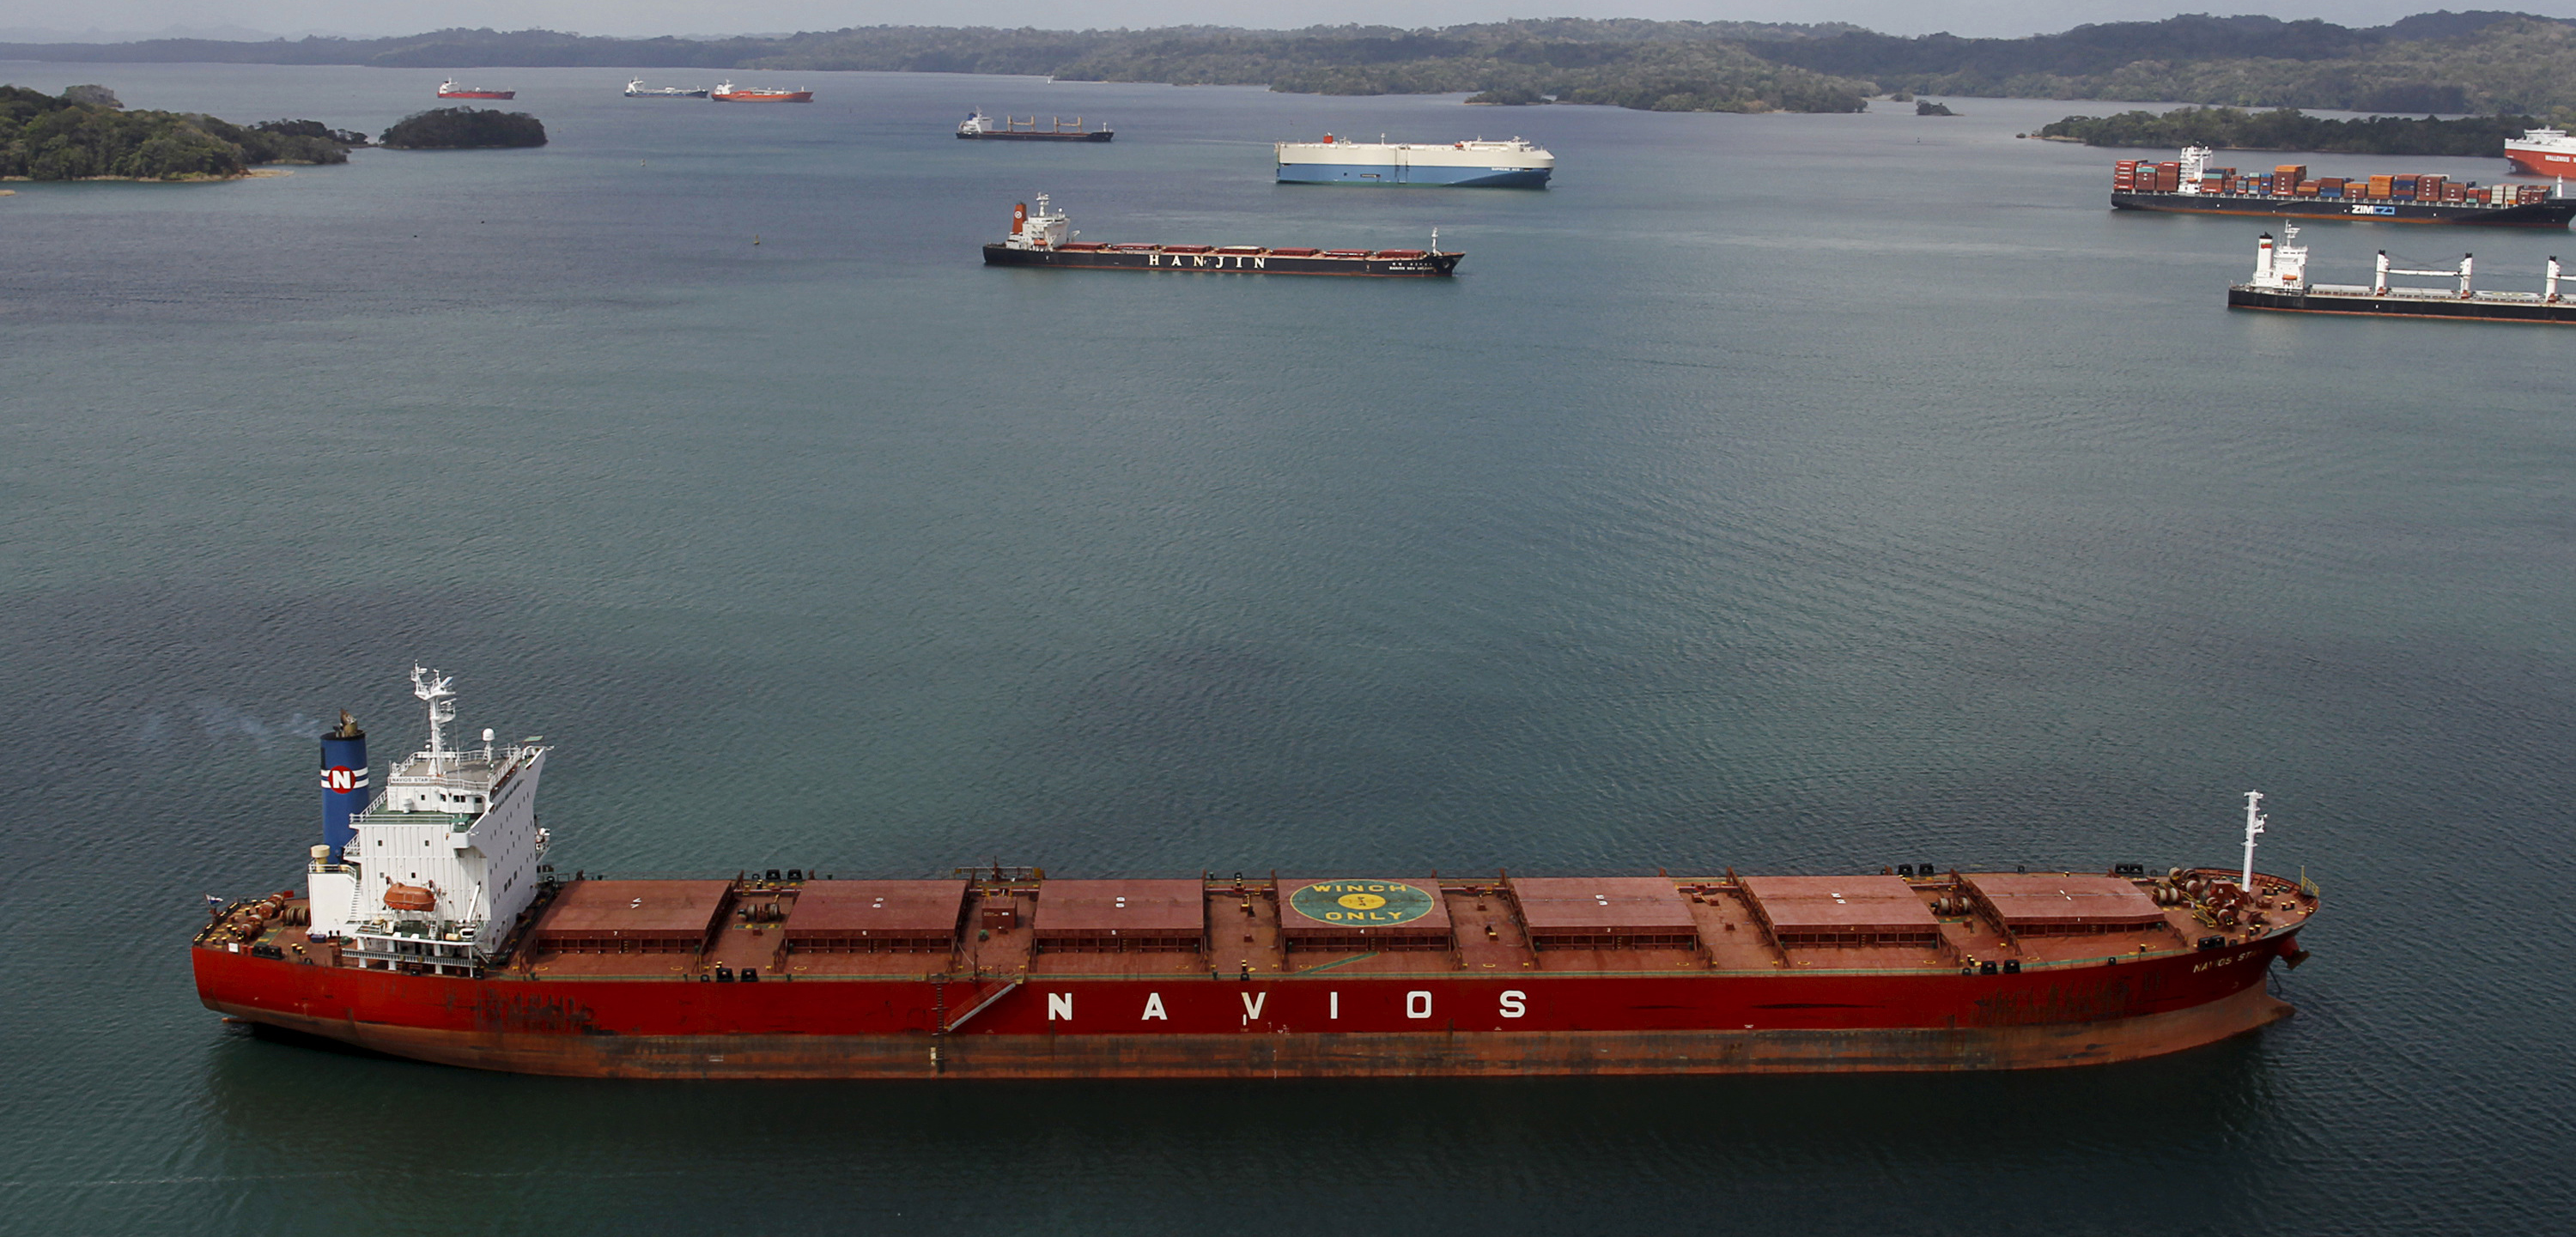 Cargo shipping traffic in the Panama Canal. Photo by Carlos Jasso/Reuters/Corbis